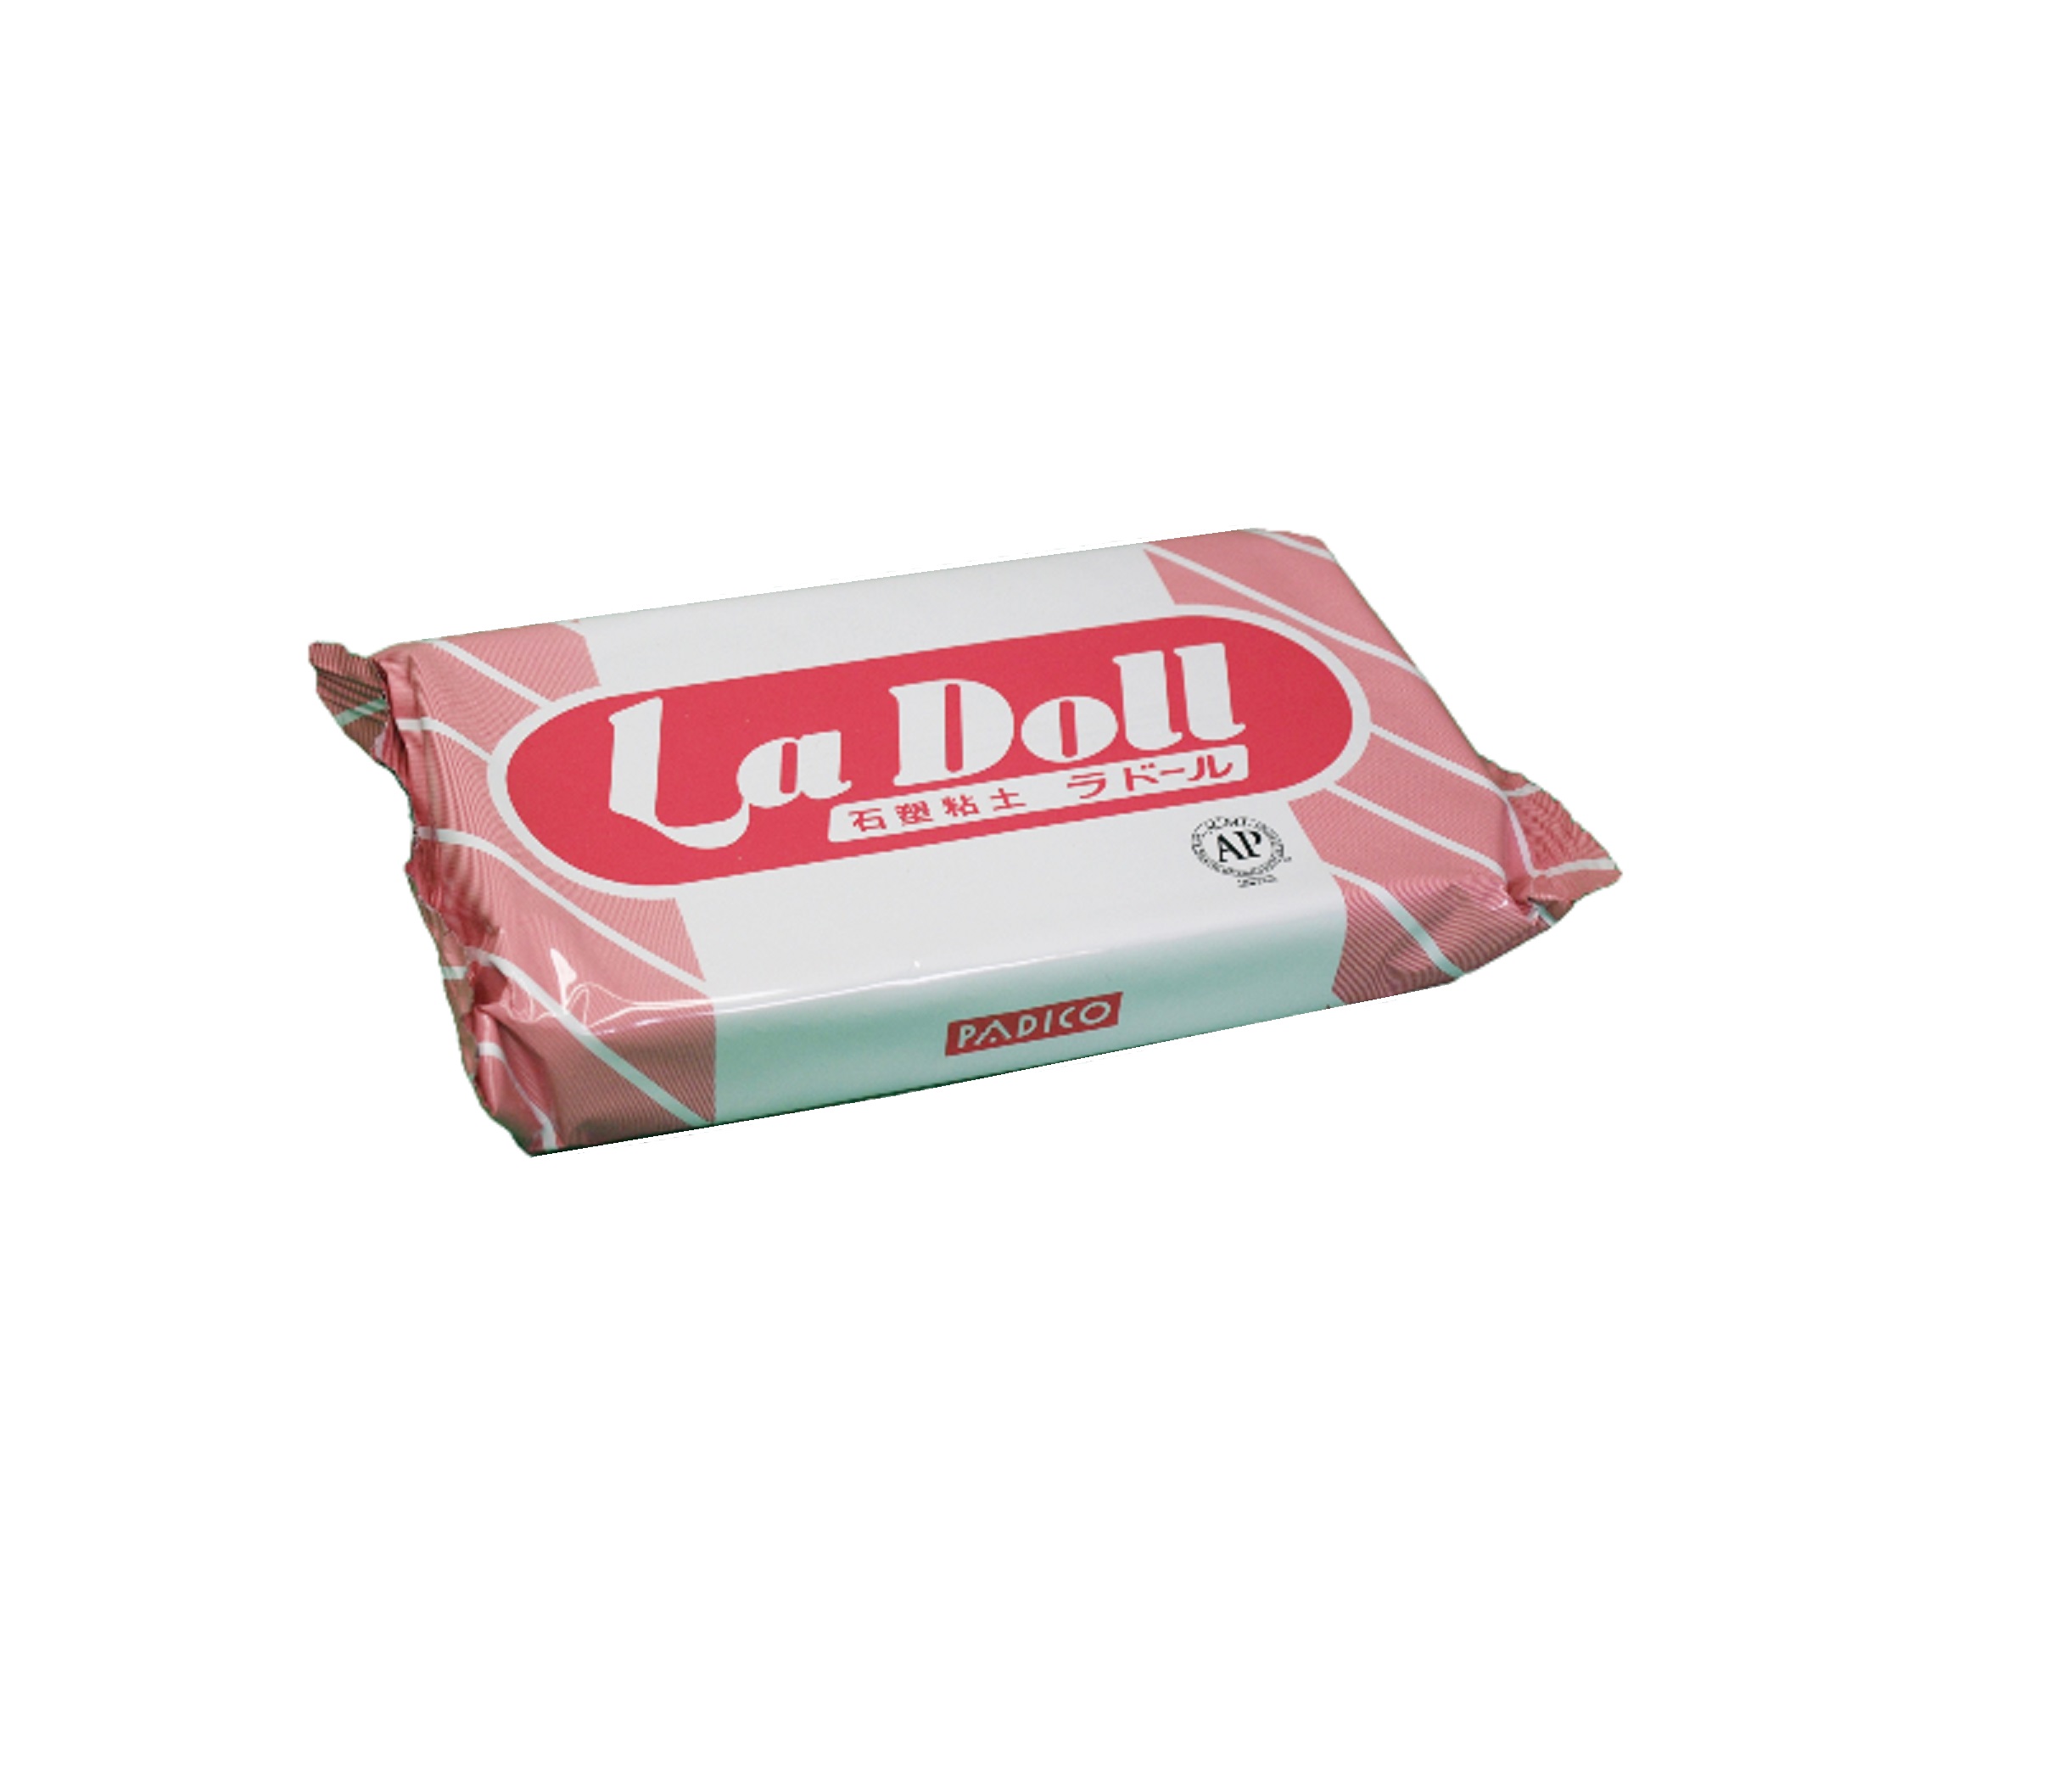 Padico La Doll Clay 500g for Doll from Japan 